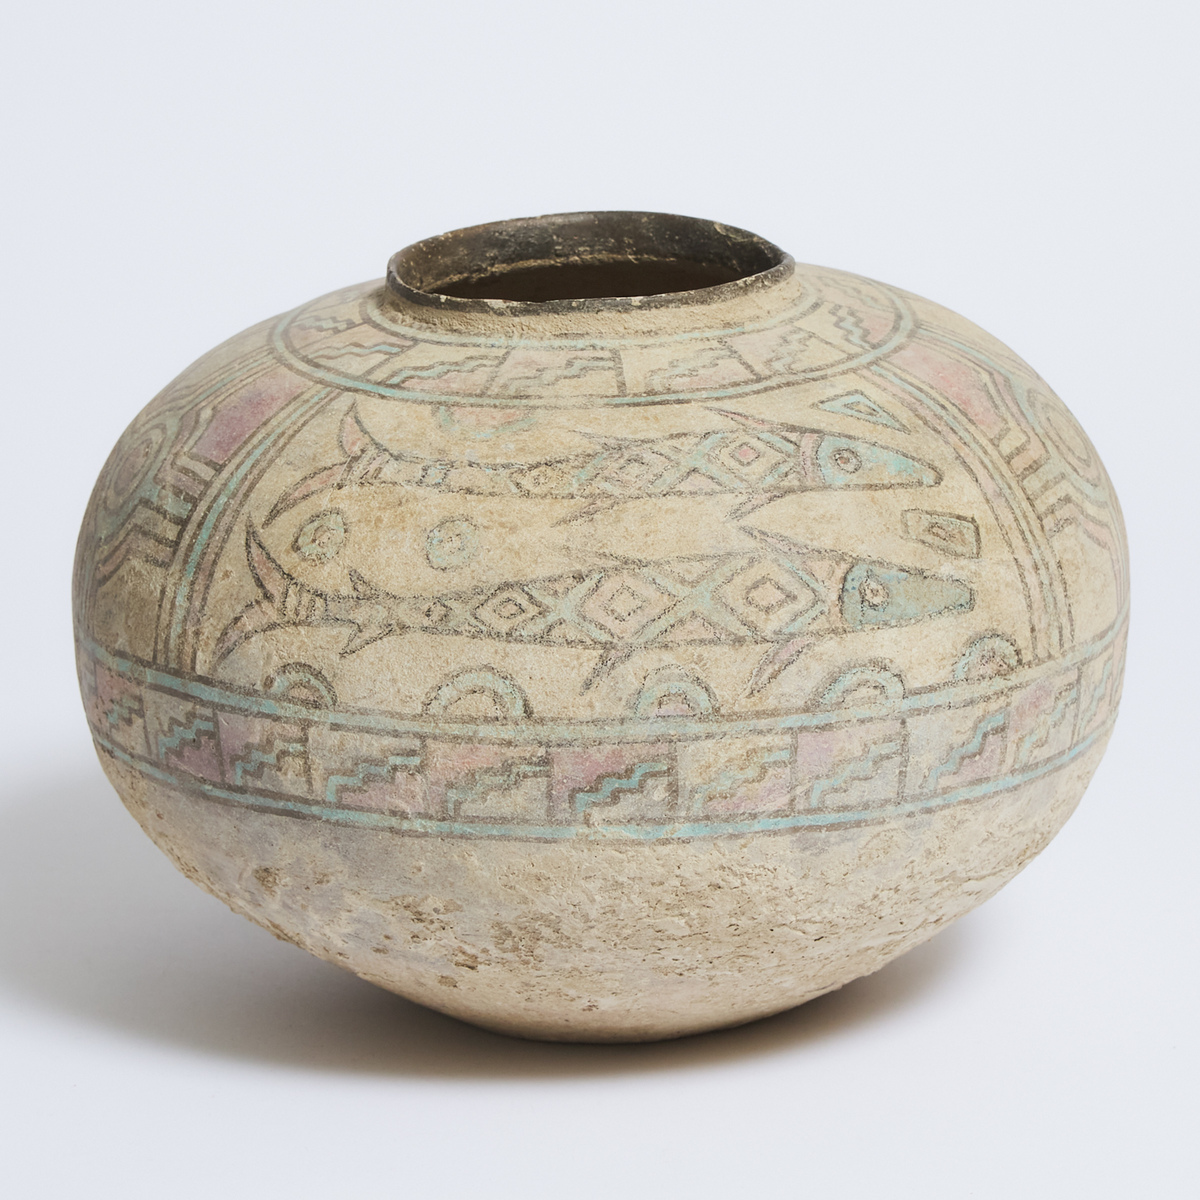 Indus Valley Civilization Polychromed Pottery Jar, Mehrgarh, 2600-2000 BC, height 8.6 in — 21.8 cm, - Image 3 of 4